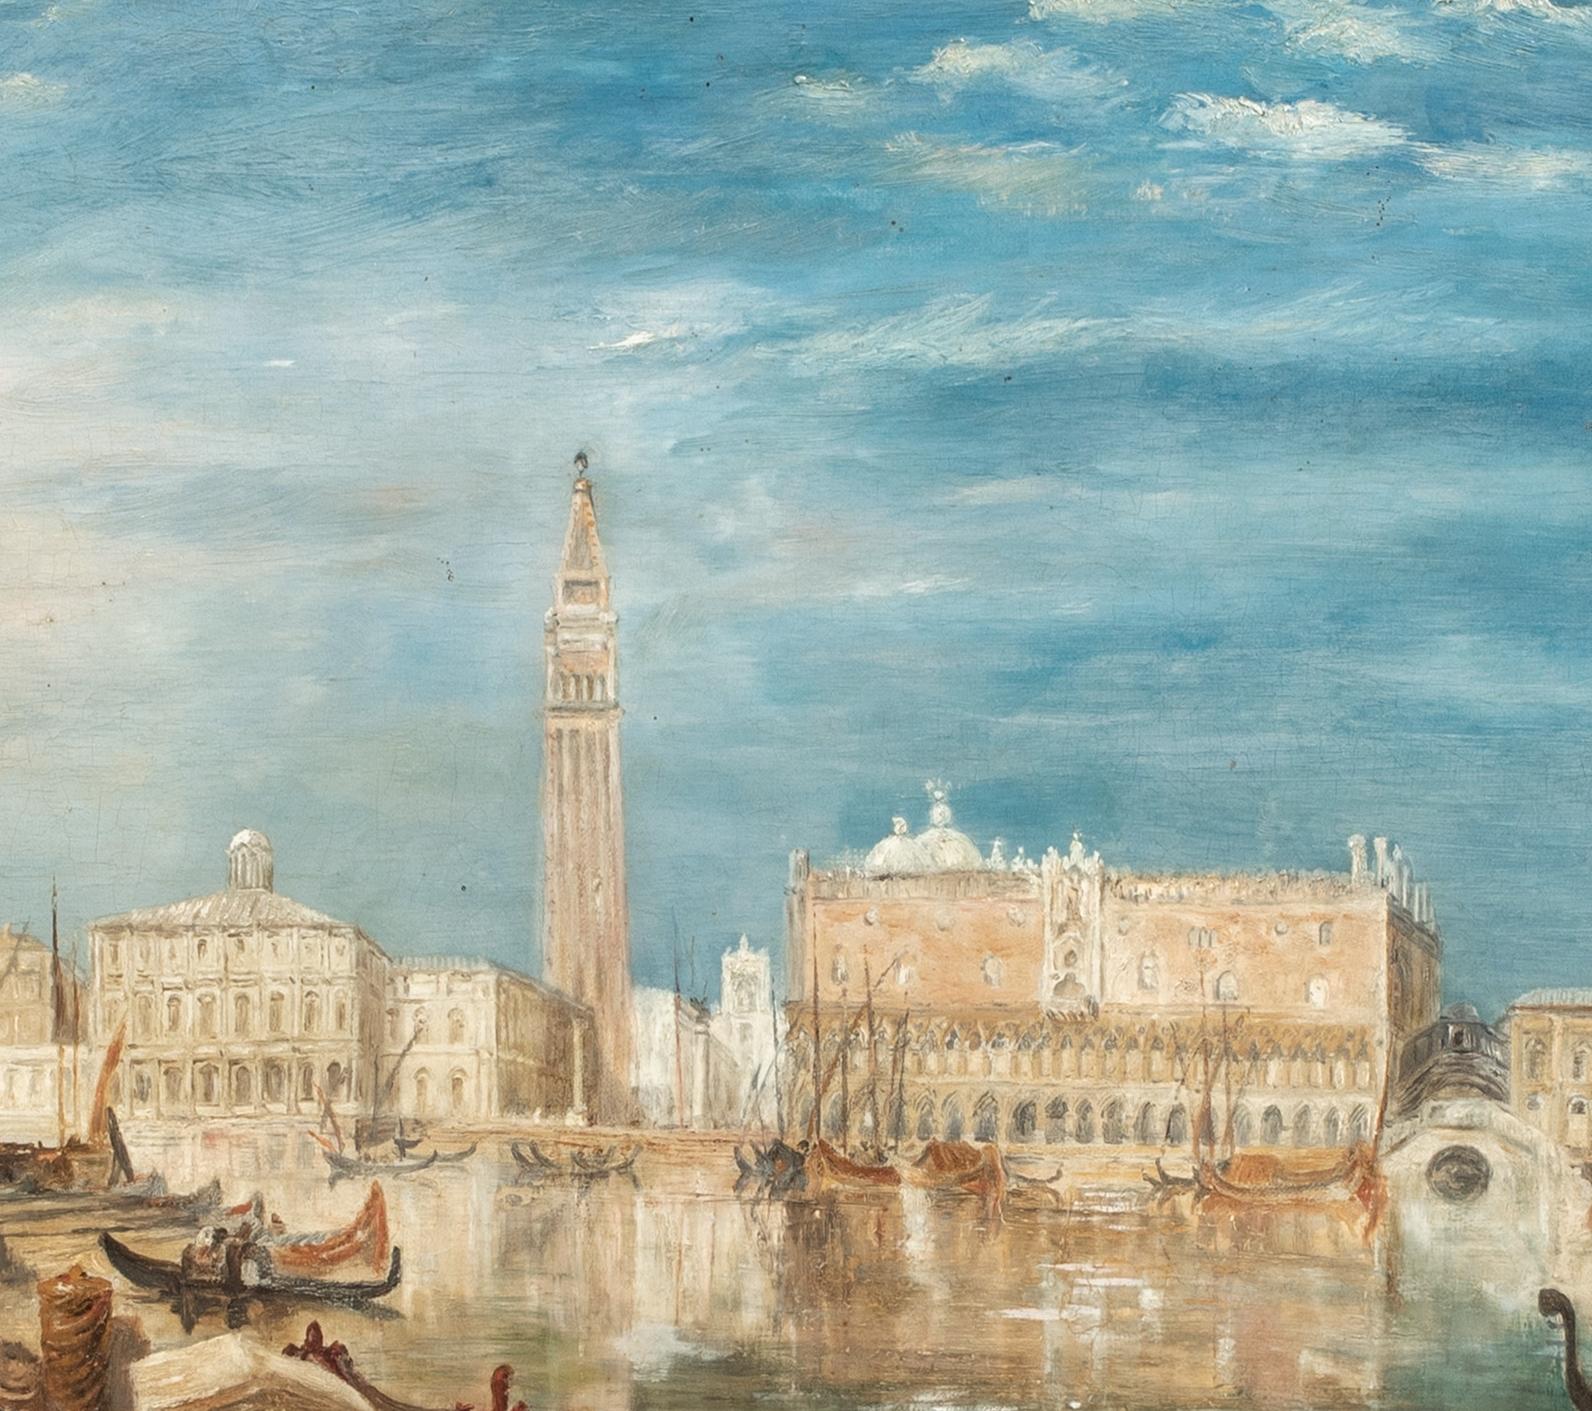 View Of Venice, 19th Century

School of Joseph Mallord William Turner (1775-1851)

Large 19th Century view of Venice, oil on canvas after JMW Turner. Good quality large scale work typical of the the work of Turner most likely to be from the artists